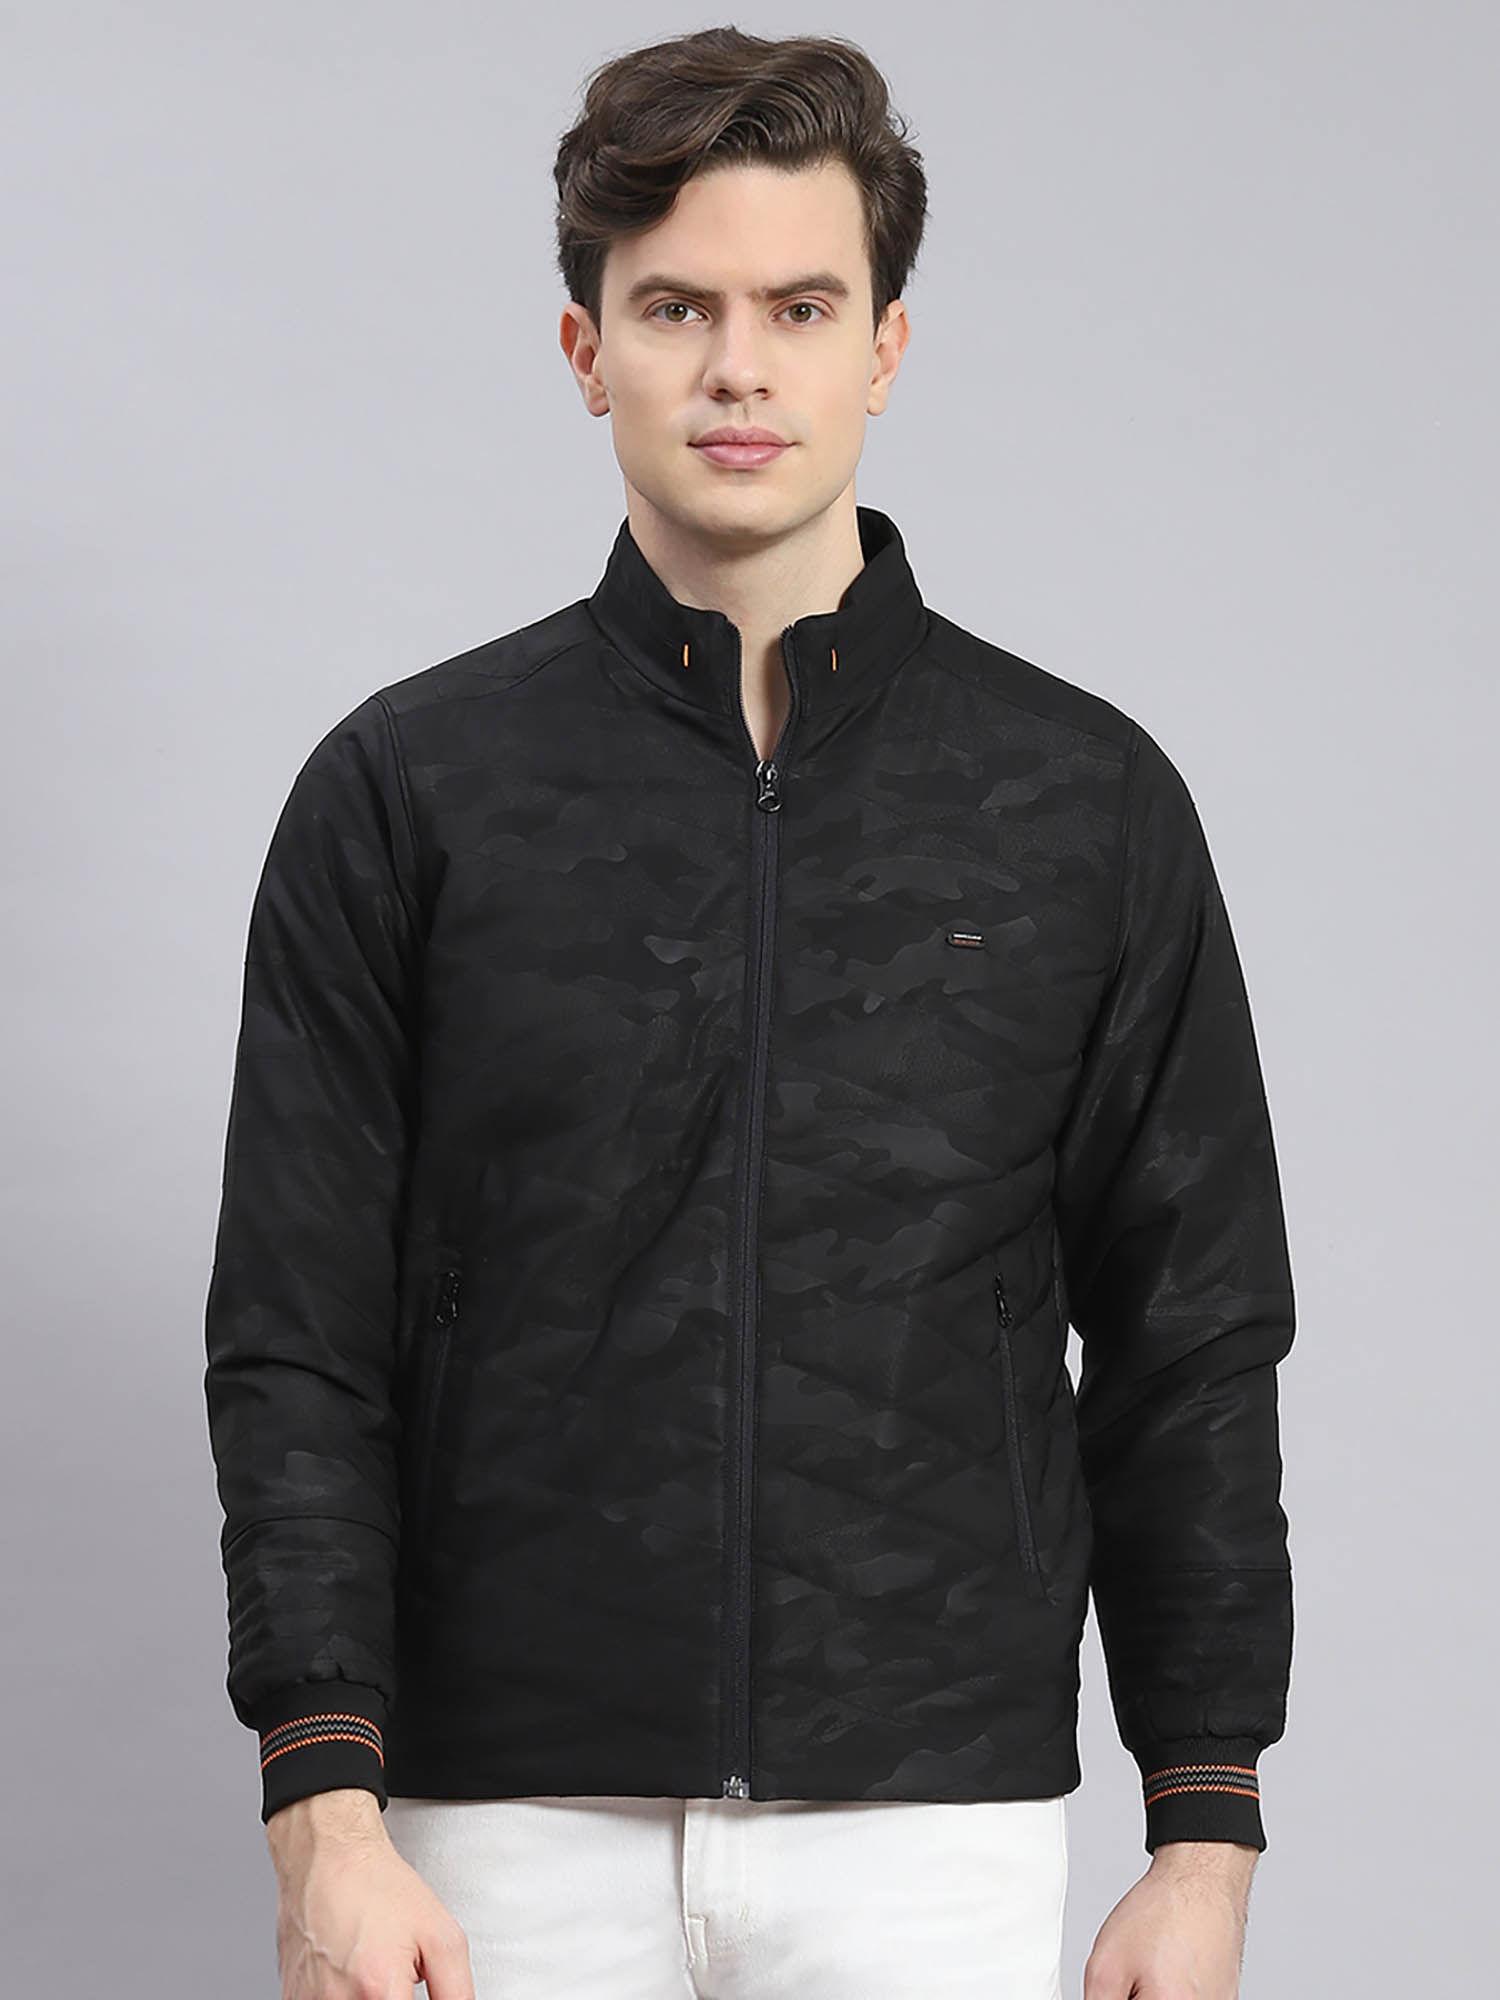 black-solid-stand-collar-jacket